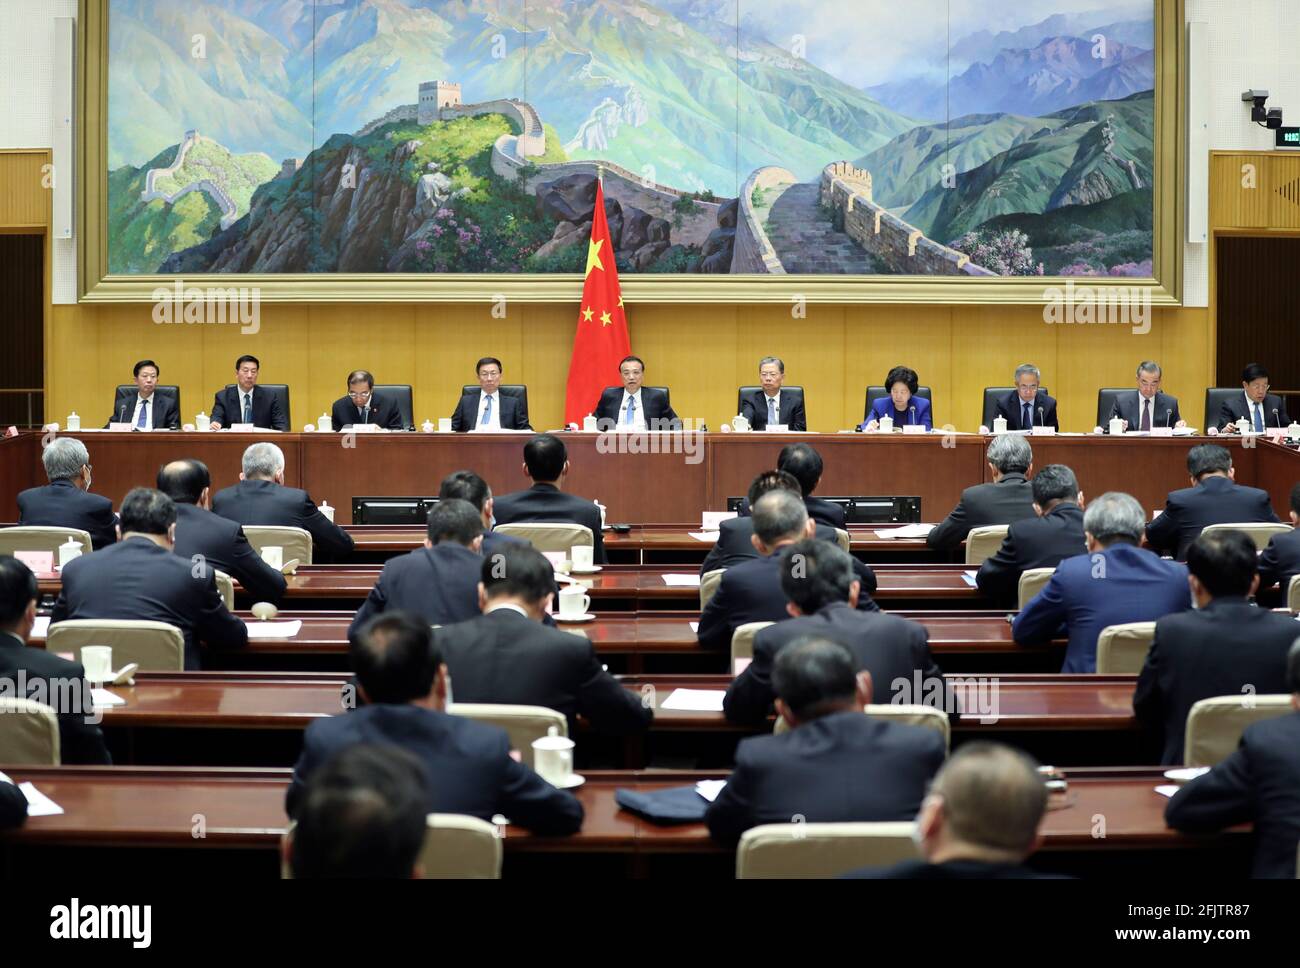 Beijing, China. 26th Apr, 2021. Chinese Premier Li Keqiang, also a member of the Standing Committee of the Political Bureau of the Communist Party of China (CPC) Central Committee, makes remarks at a State Council meeting on clean governance in Beijing, capital of China, April 26, 2021. Vice Premier Han Zheng and Zhao Leji, secretary of the CPC Central Commission for Discipline Inspection, both members of the Standing Committee of the Political Bureau of the CPC Central Committee, attended the meeting. Credit: Ding Lin/Xinhua/Alamy Live News Stock Photo